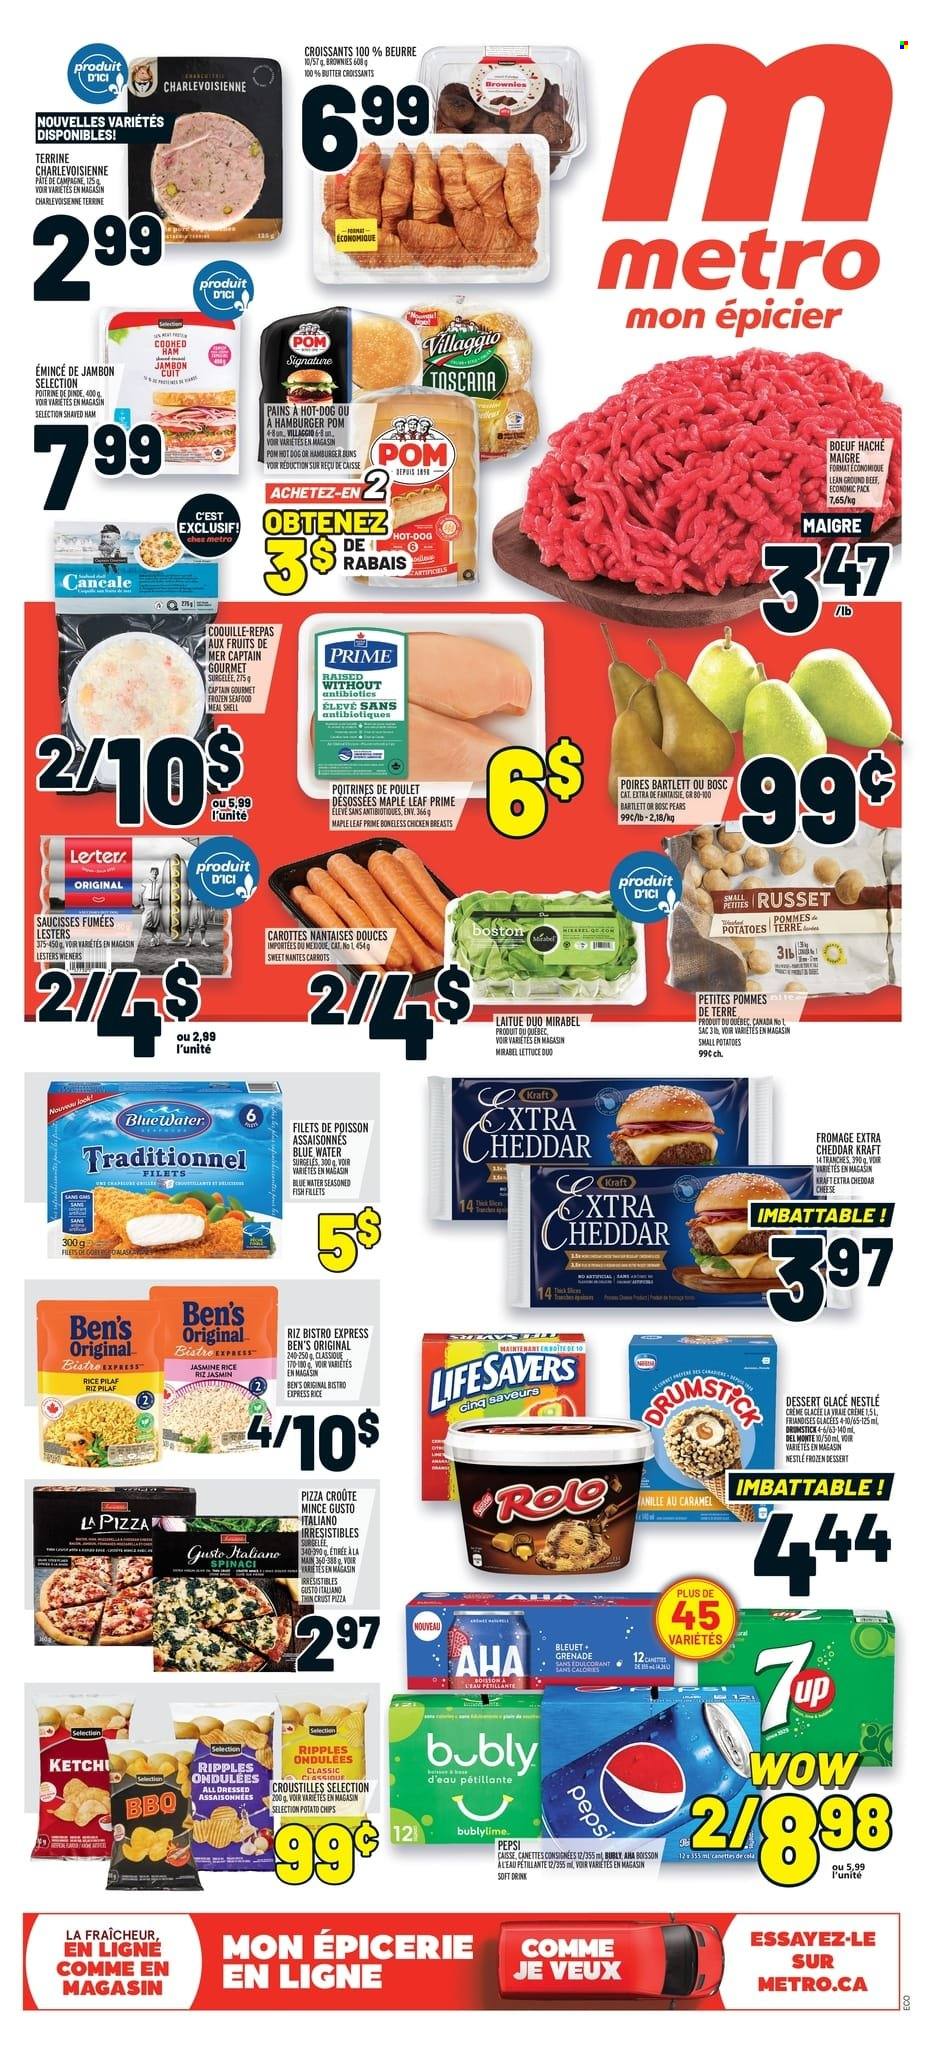 thumbnail - Metro Flyer - May 19, 2022 - May 25, 2022 - Sales products - croissant, buns, burger buns, brownies, carrots, russet potatoes, potatoes, lettuce, pears, fish fillets, seafood, fish, hot dog, pizza, Kraft®, ham, cheddar, rice, jasmine rice, caramel, Pepsi, soft drink, beef meat, ground beef, Nestlé. Page 1.